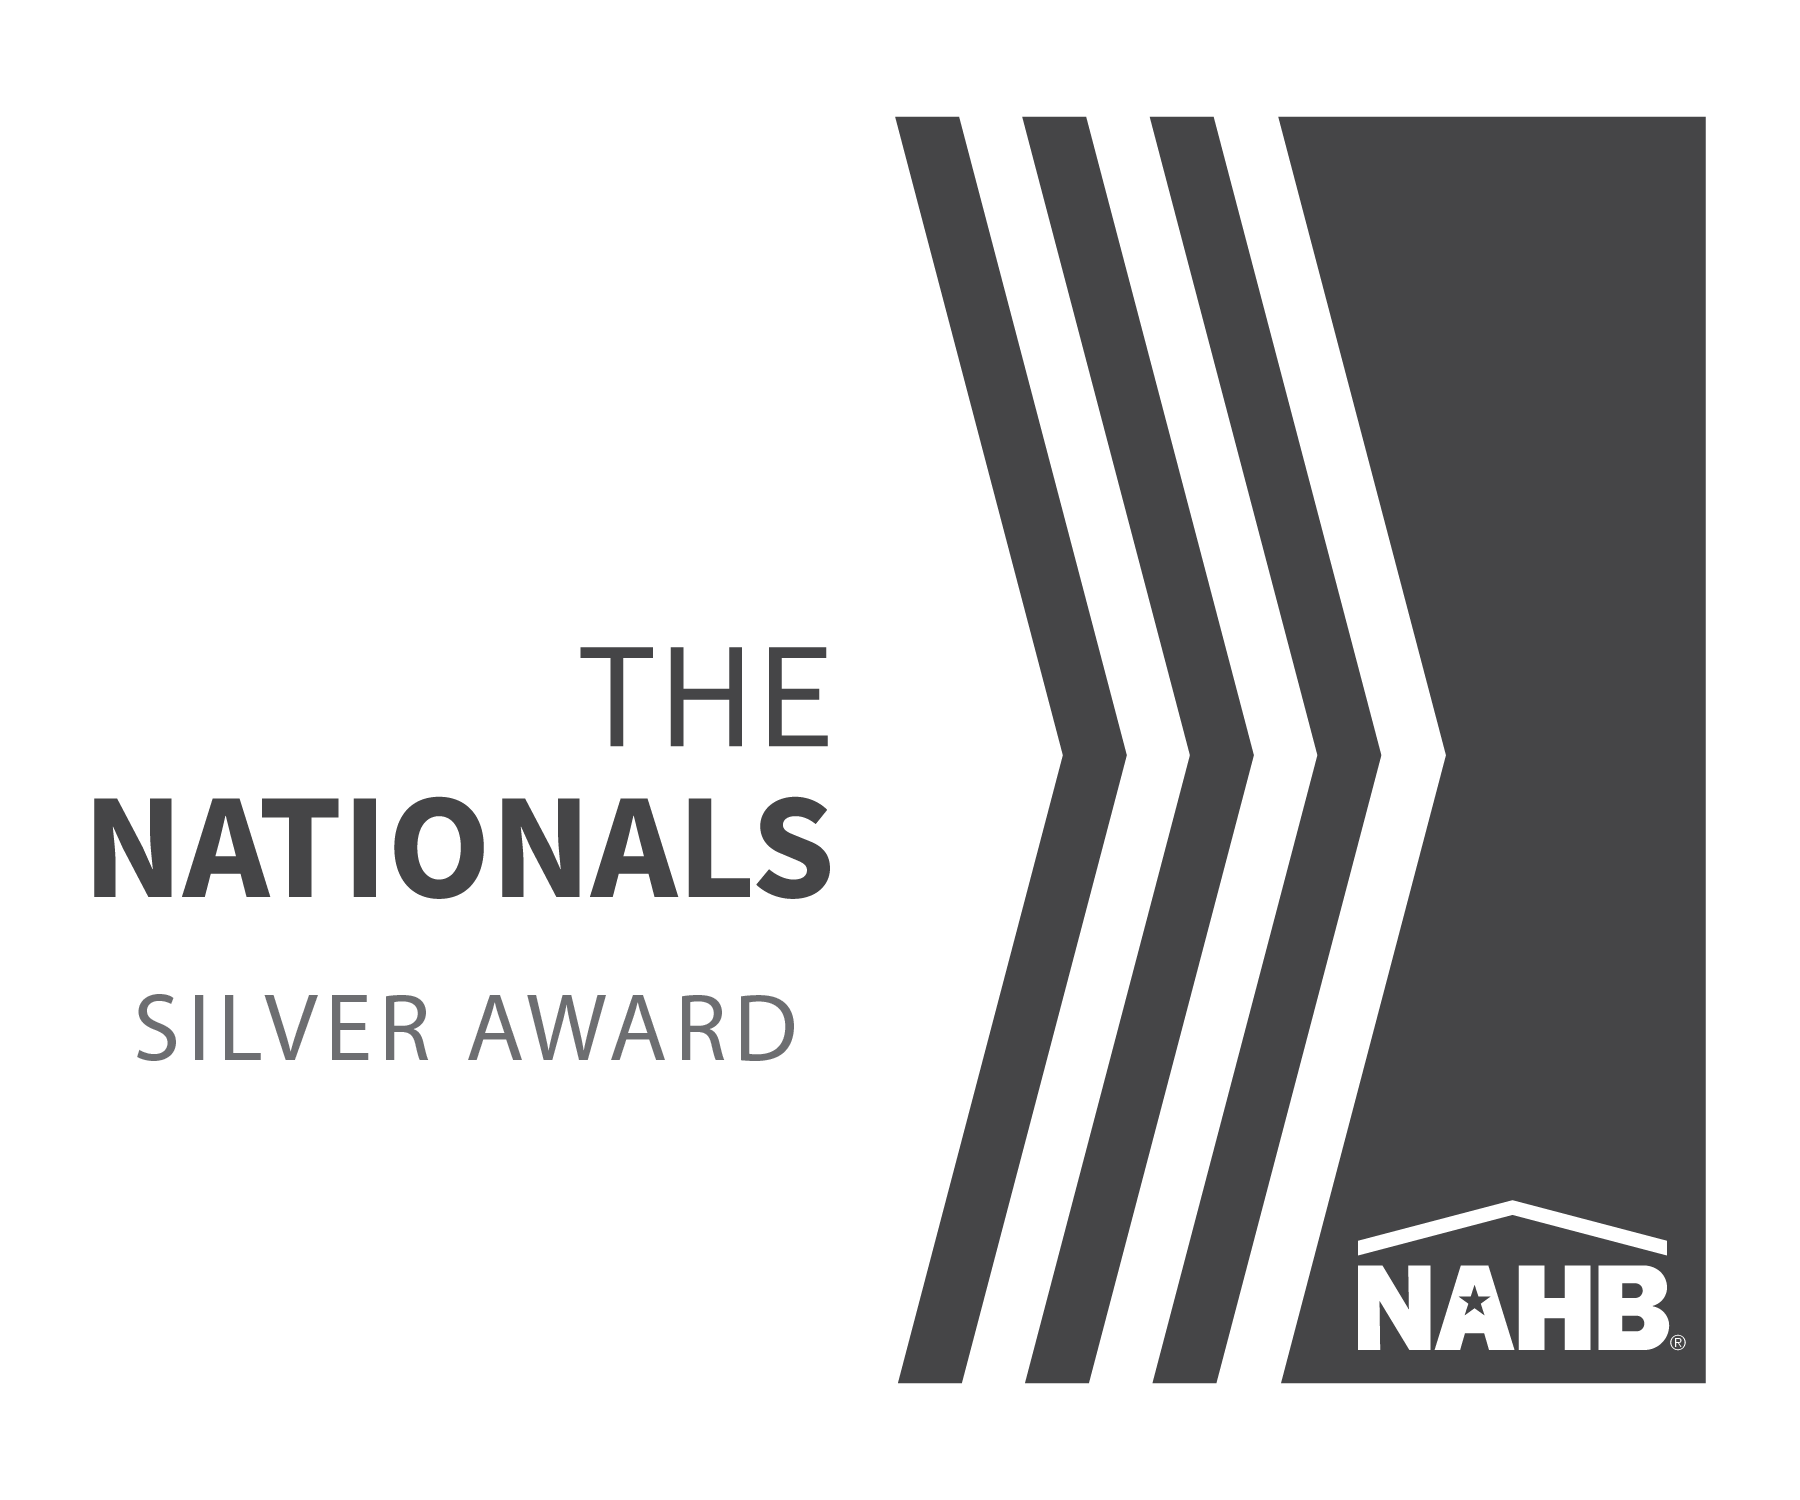 The Nationals By NAHB Silver Award